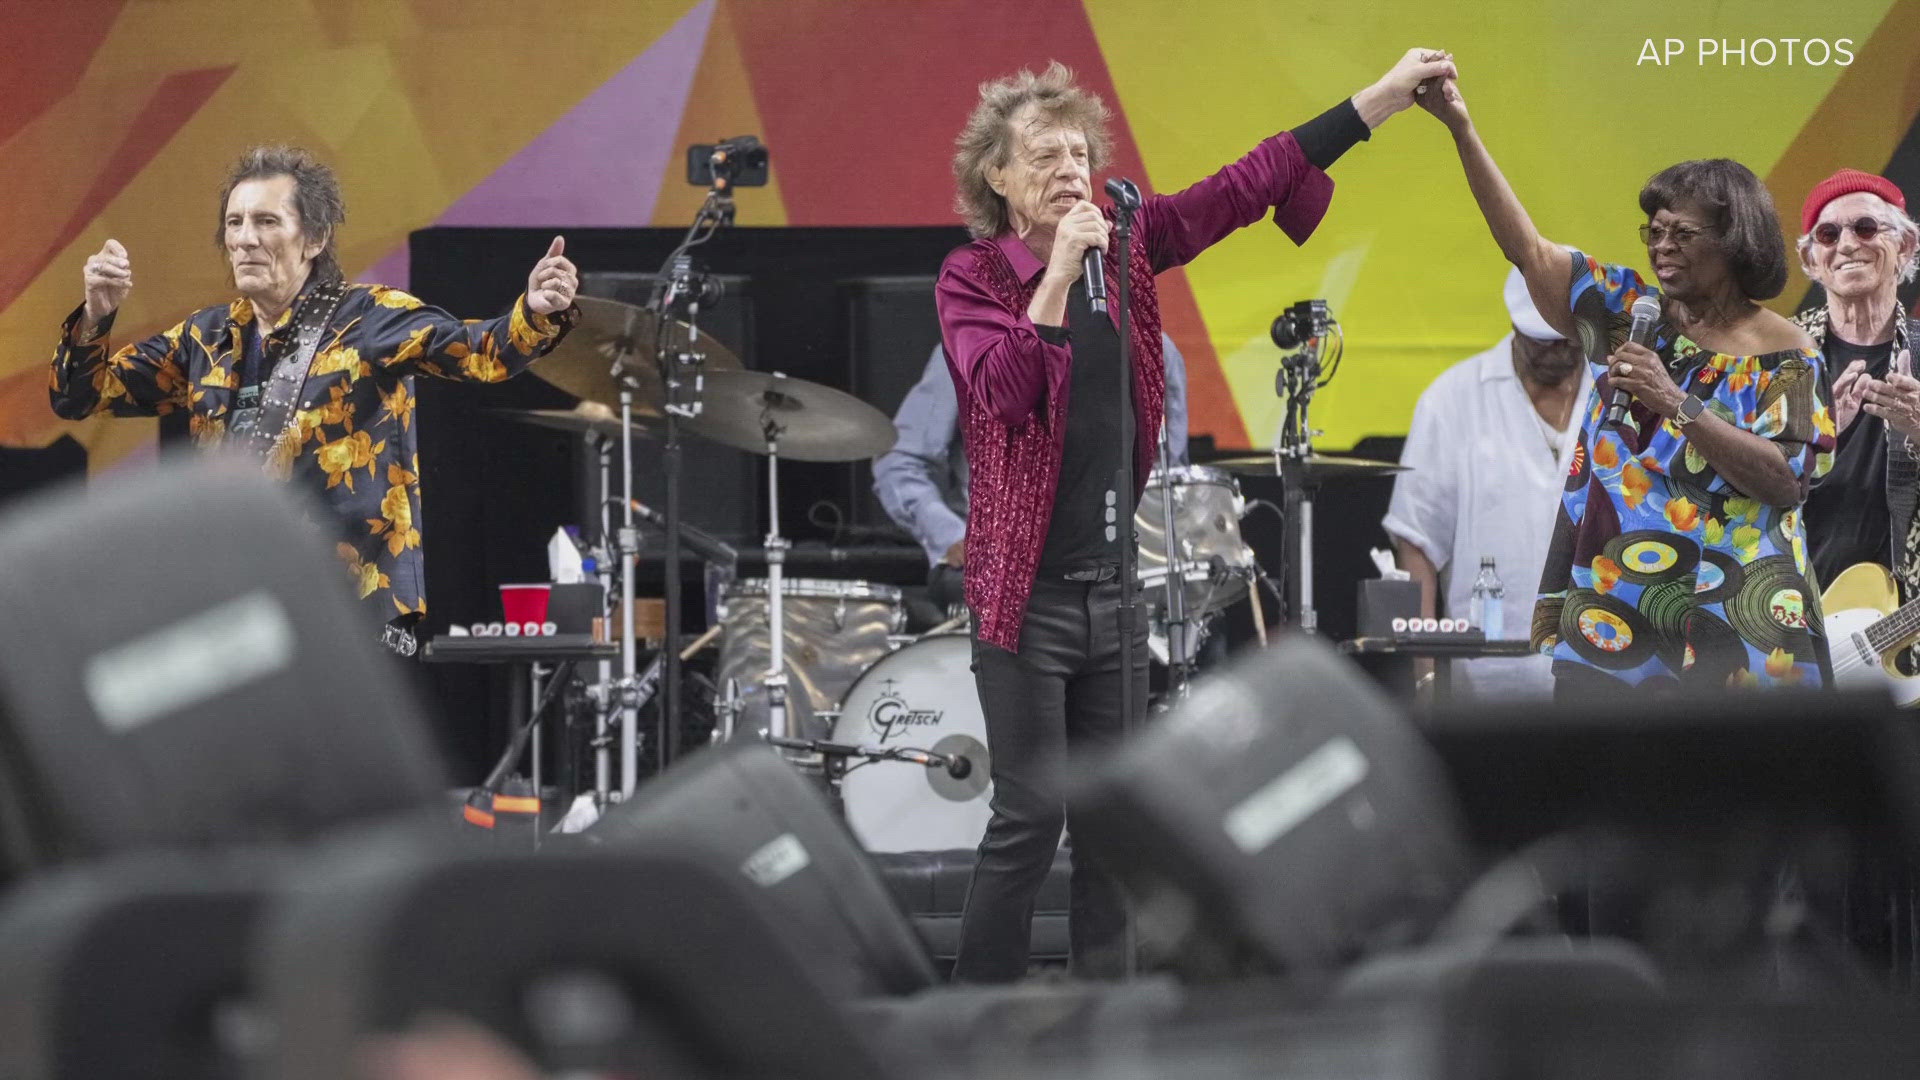 Irma Thomas, New Orleans' soul queen, performed 'Time is On My Side,' with Mick Jagger and the Rolling Stones Thursday at the Jazz Fest.